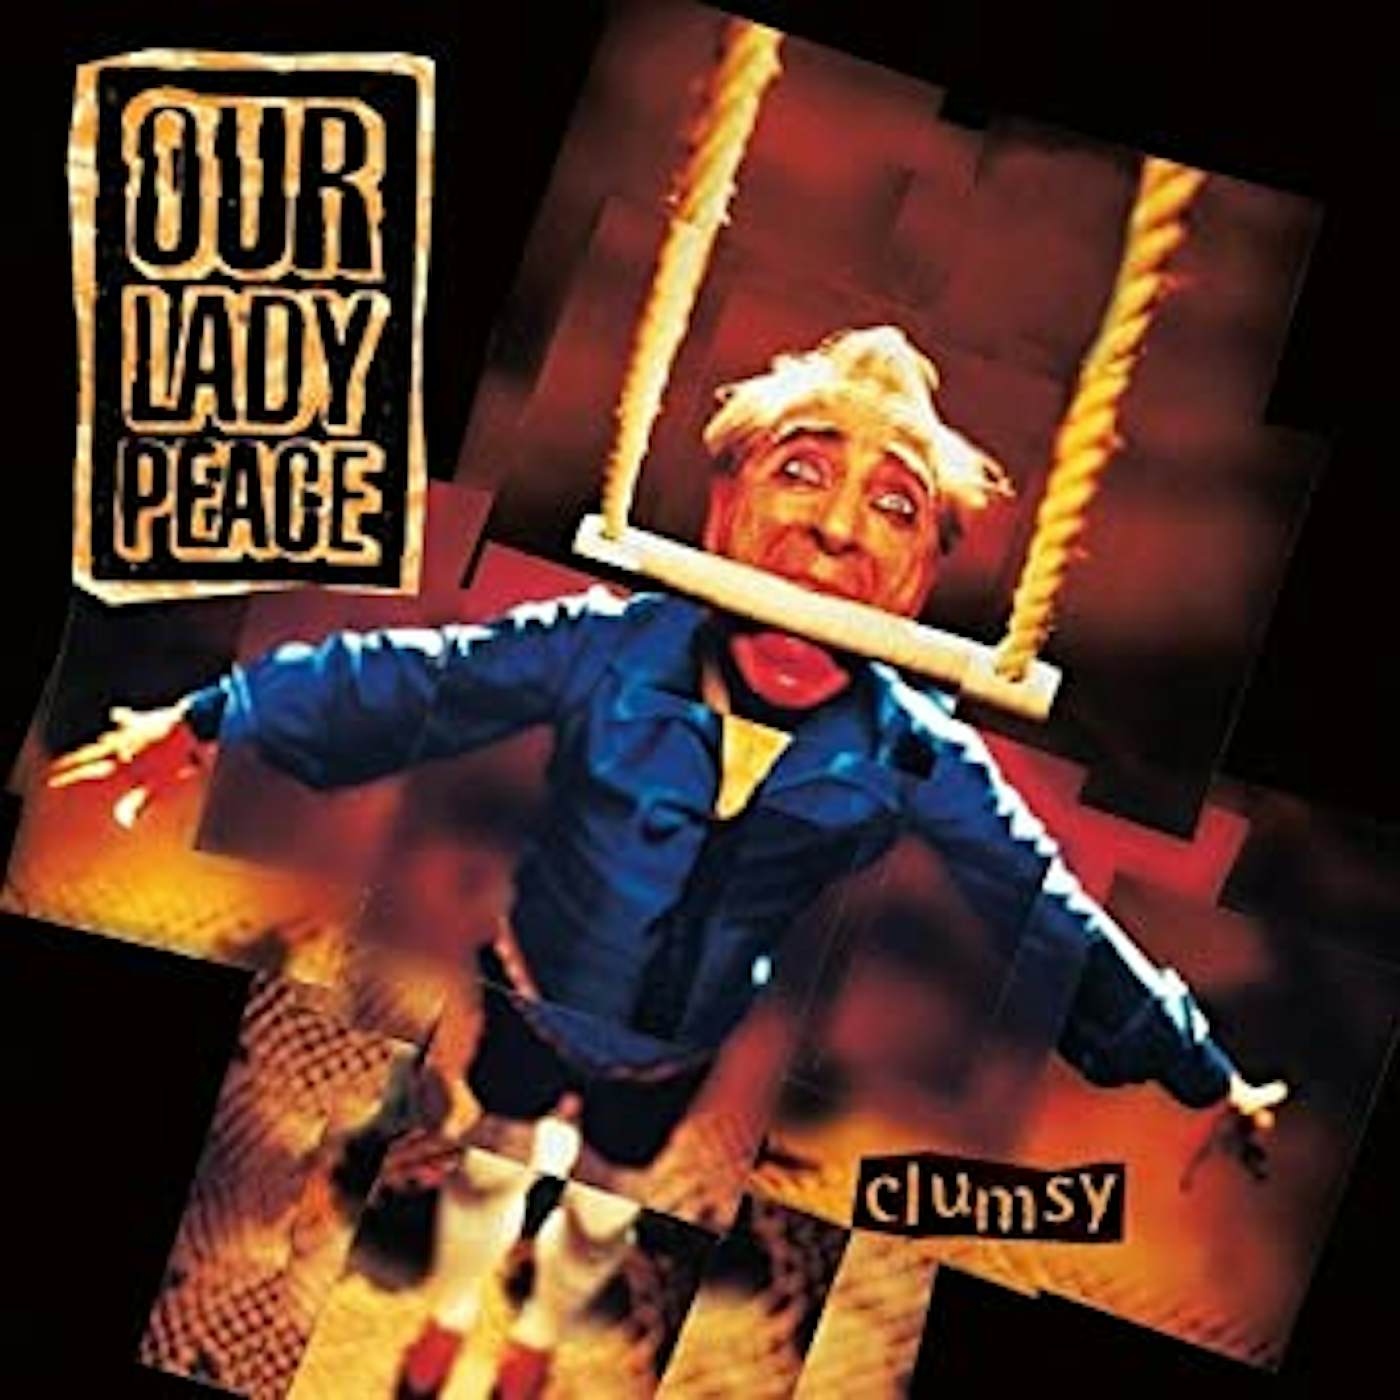 Our Lady Peace Clumsy Vinyl Record